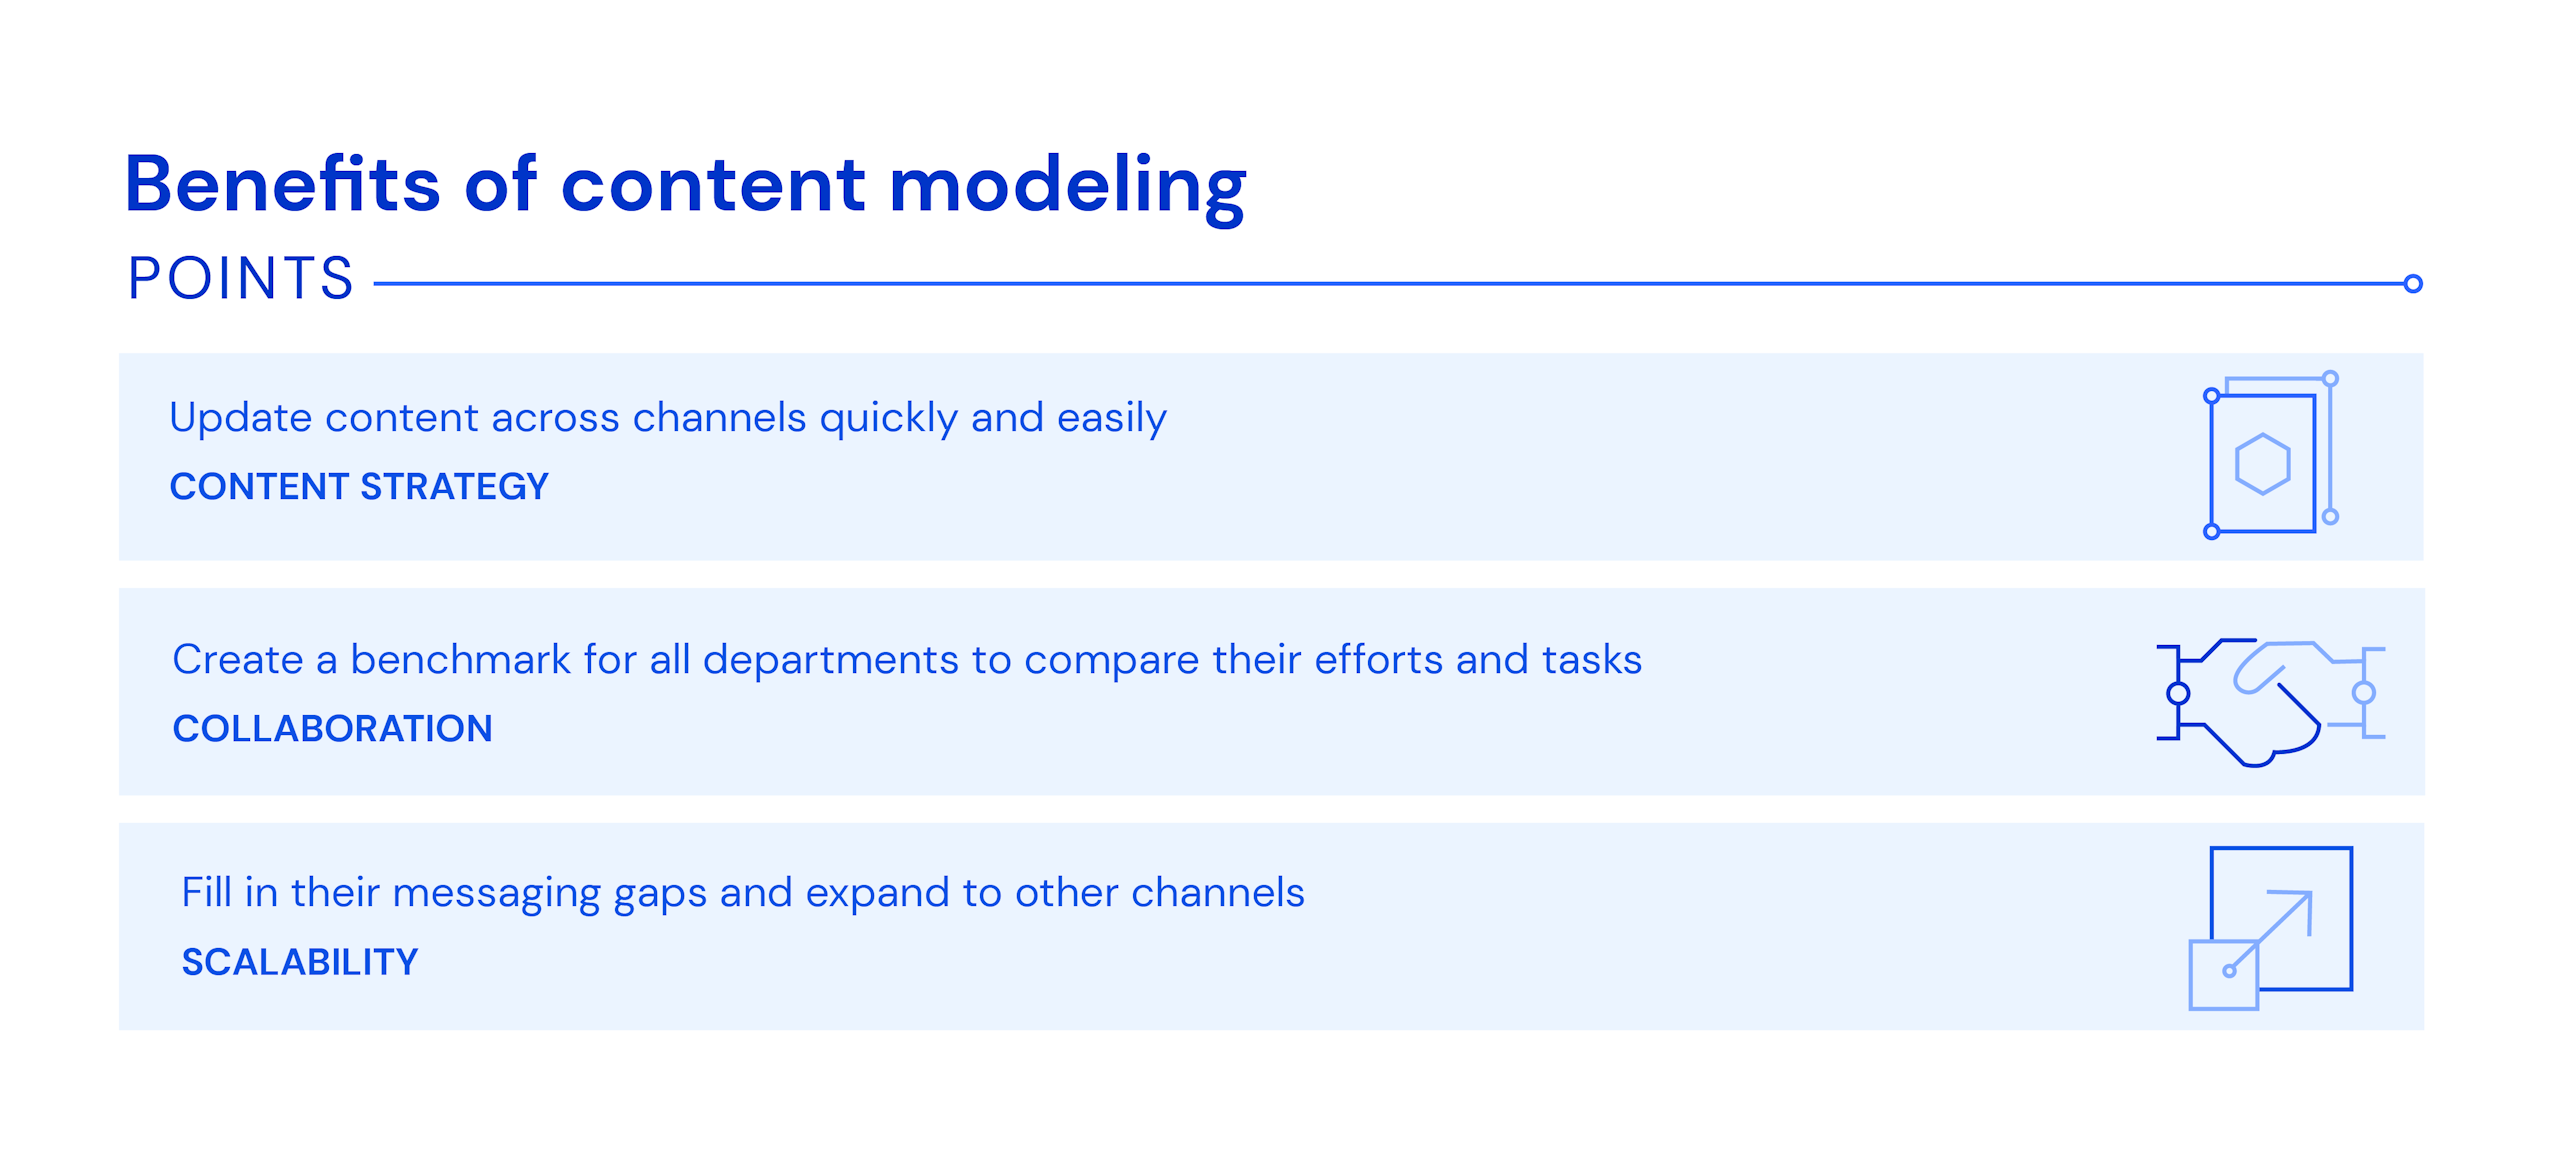 Benefits of content modeling